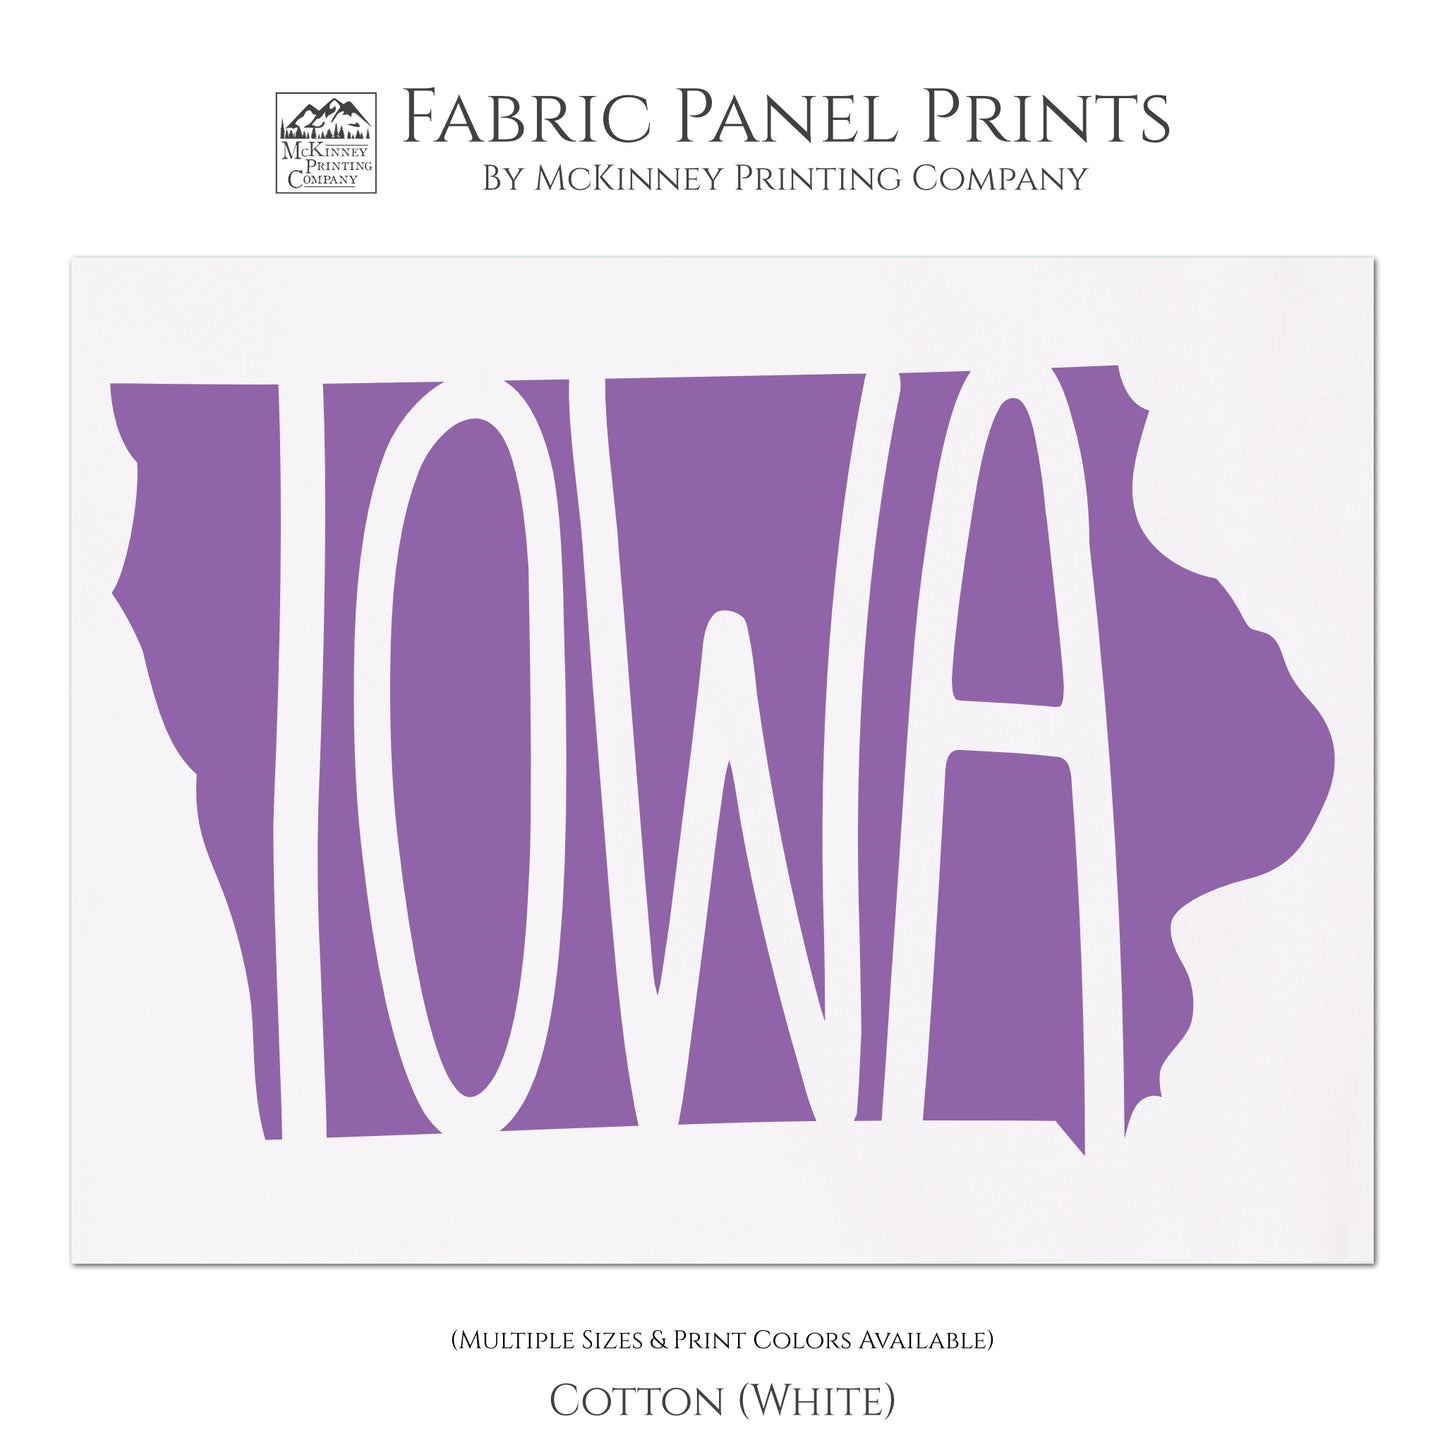 Iowa - Fabric Panel Print, Large | Small Cotton Quilt Block, Craft, State Silhouette, Pillow, Towel, TShirt - Cotton, White